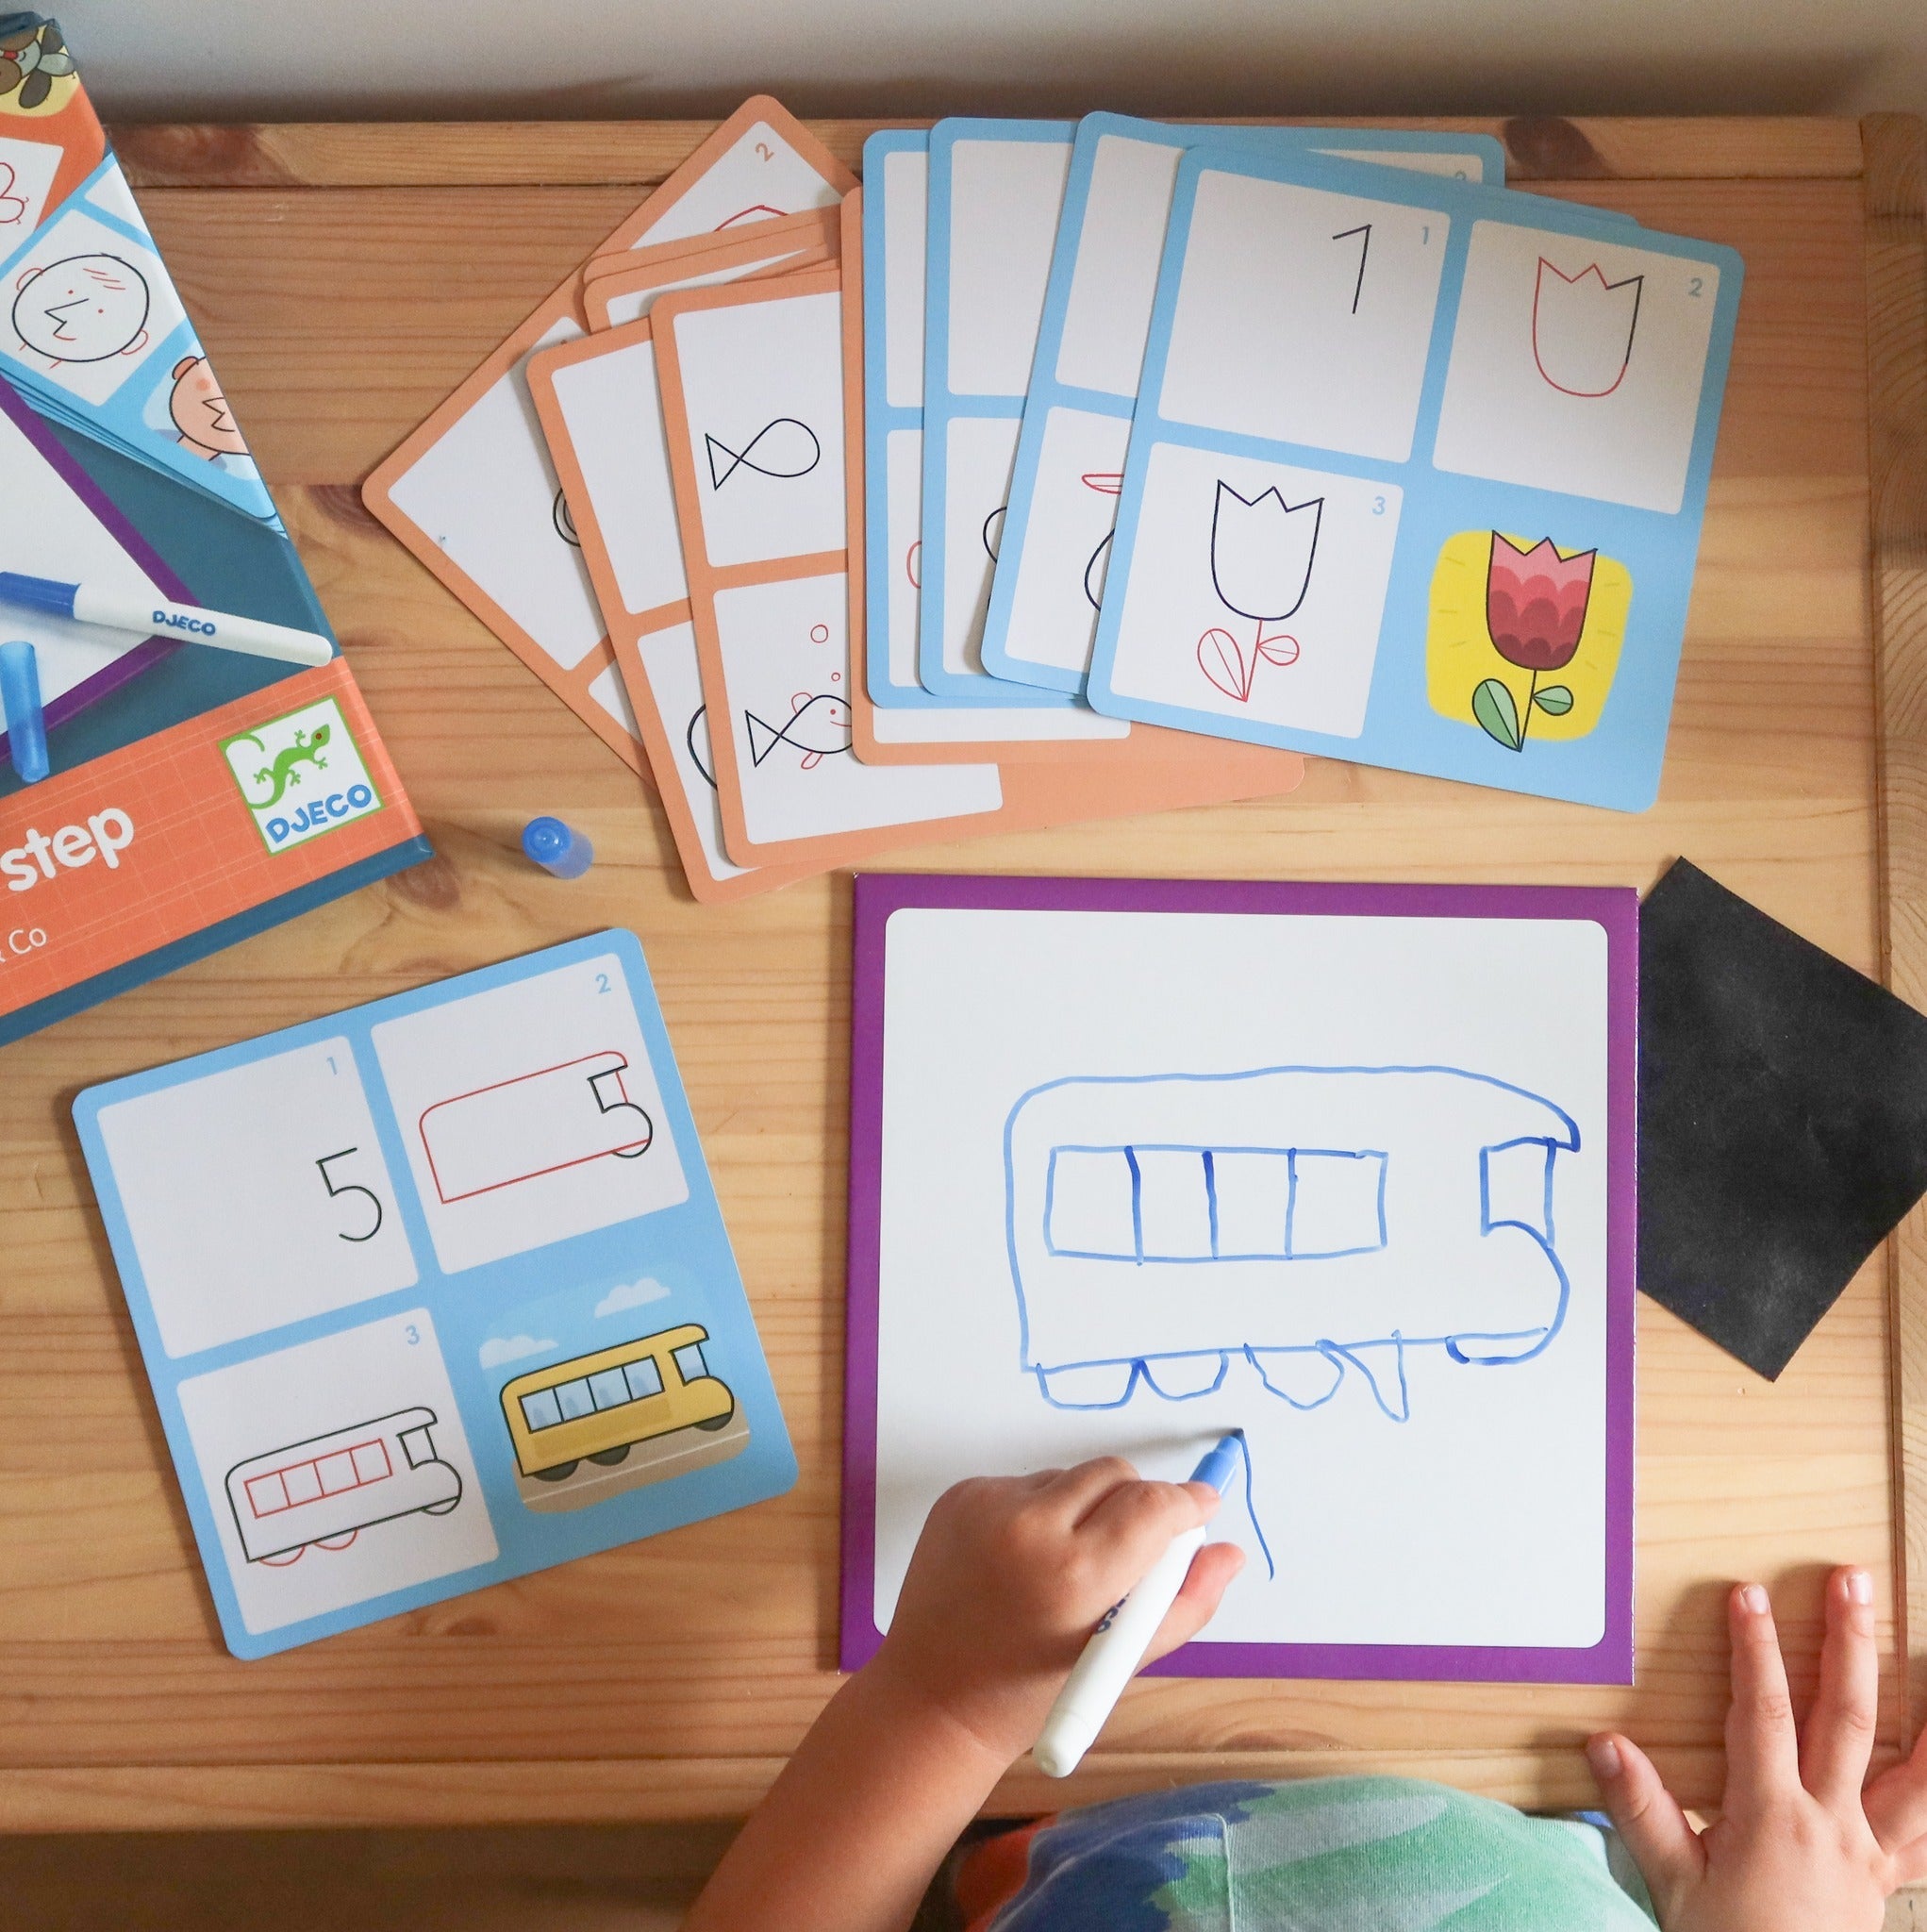 Djeco: Step by Step 1, 2 ,3 and Co drawing learning kit